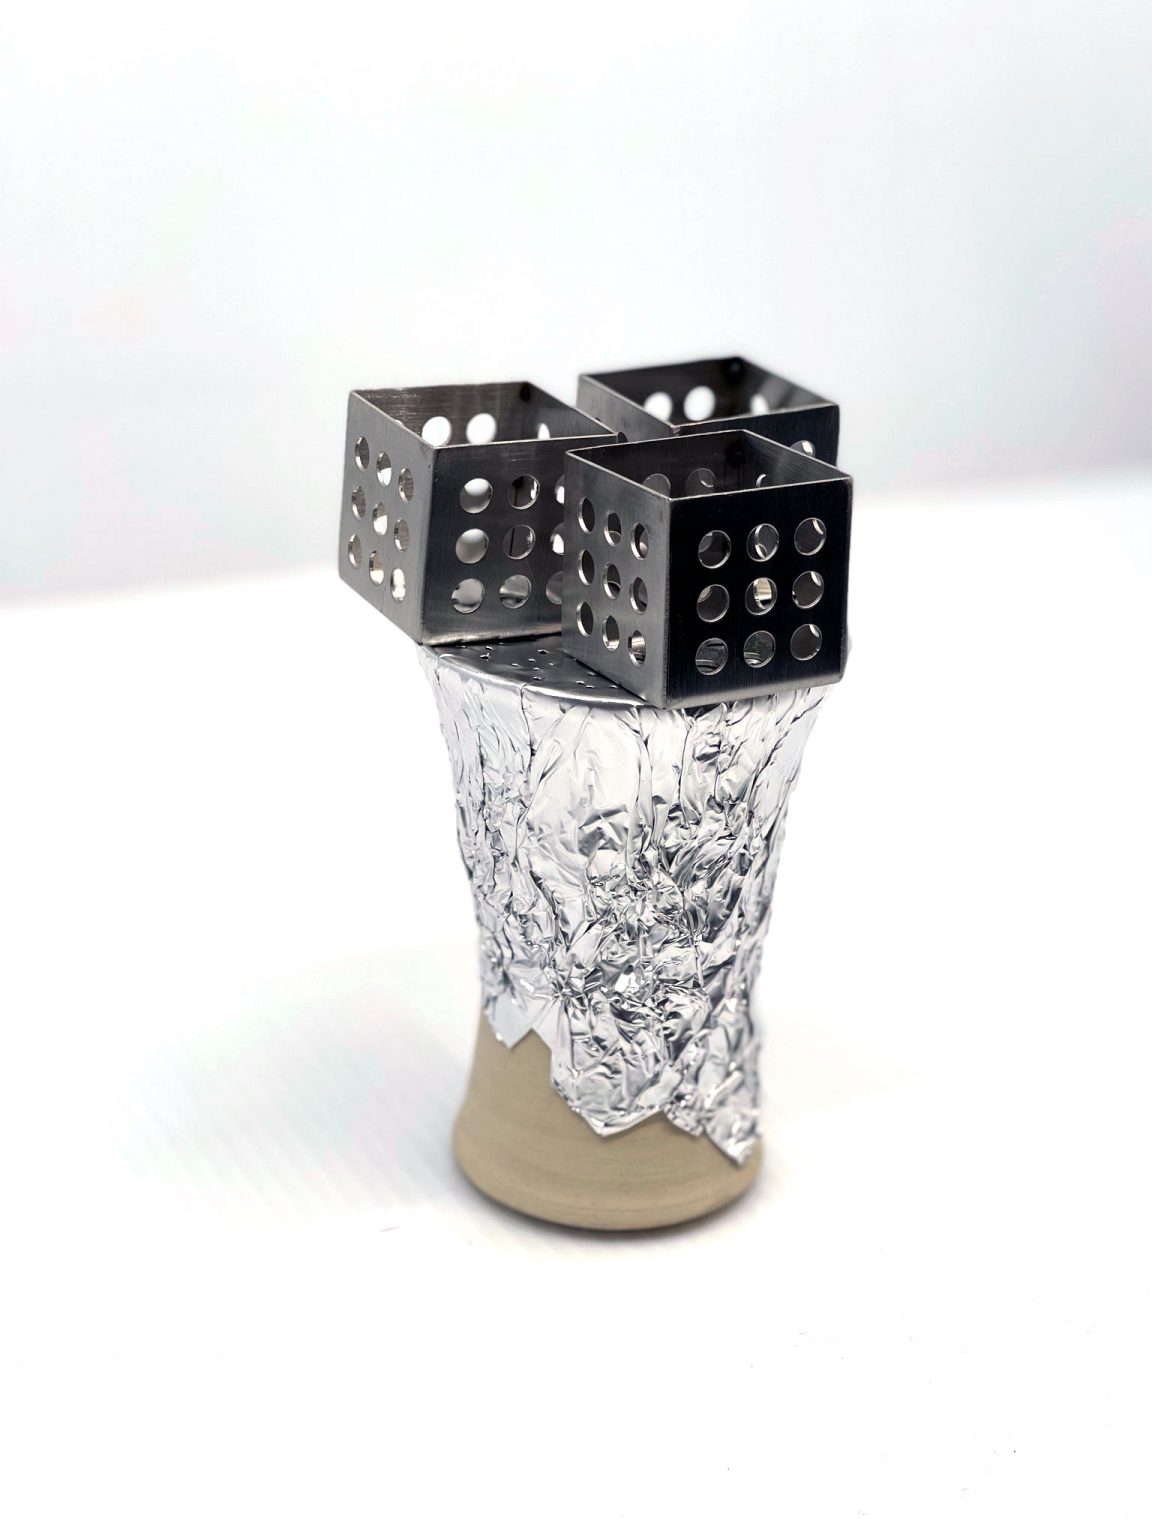 Cube-i-Coals Heat Mangement Device for Charcoal Use with Foil